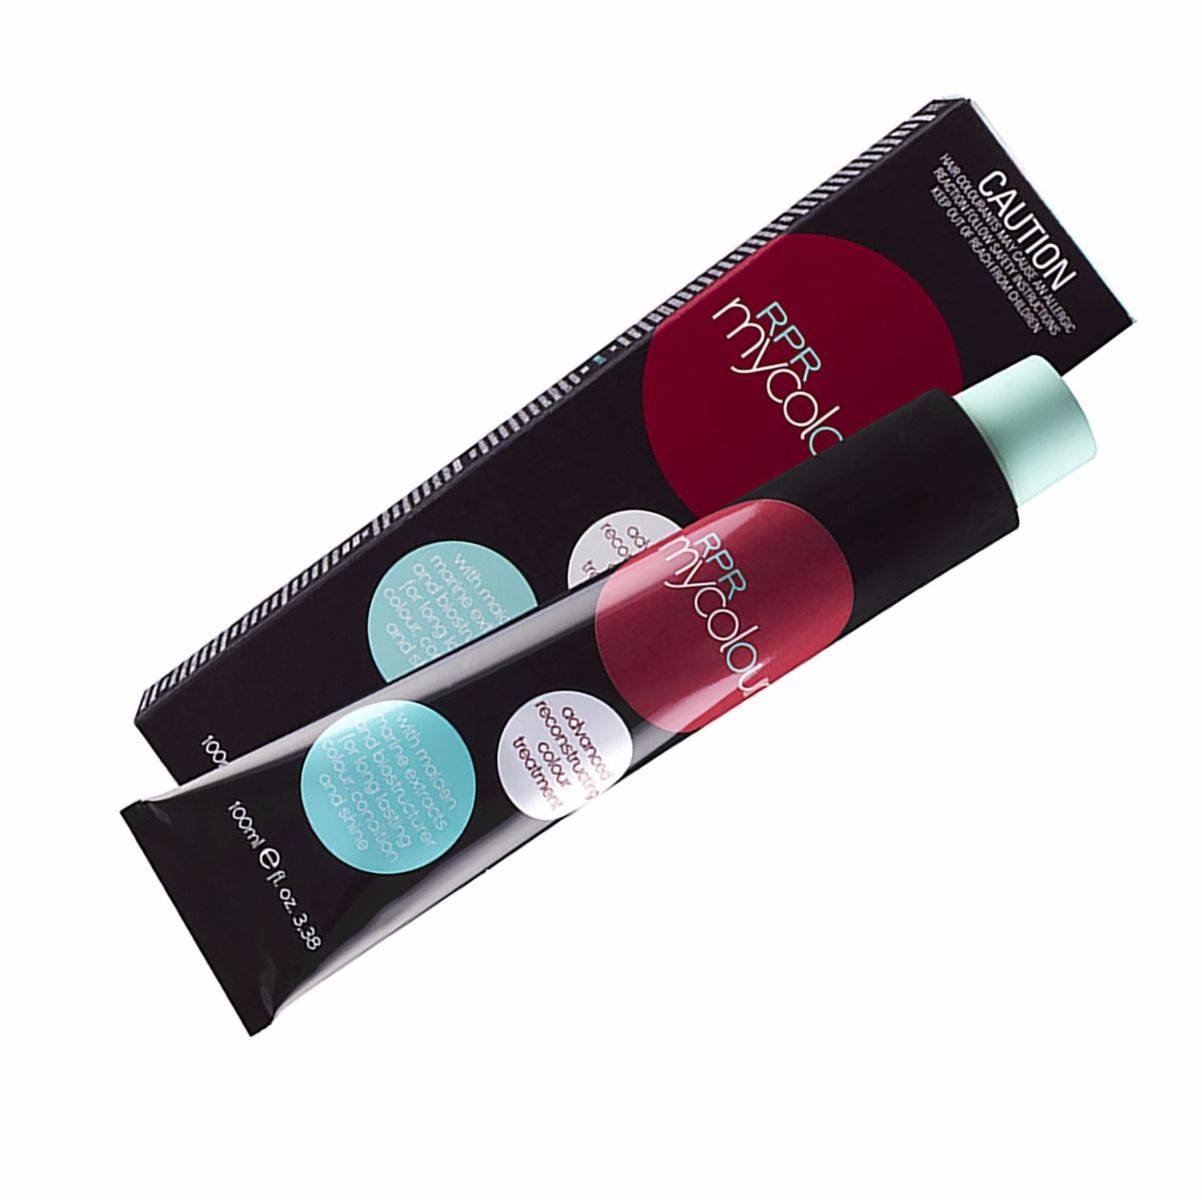 RPR My Colour 7.00 Level 7 Intense Natural 100g tube Mix 1:1.5 - On Line Hair Depot